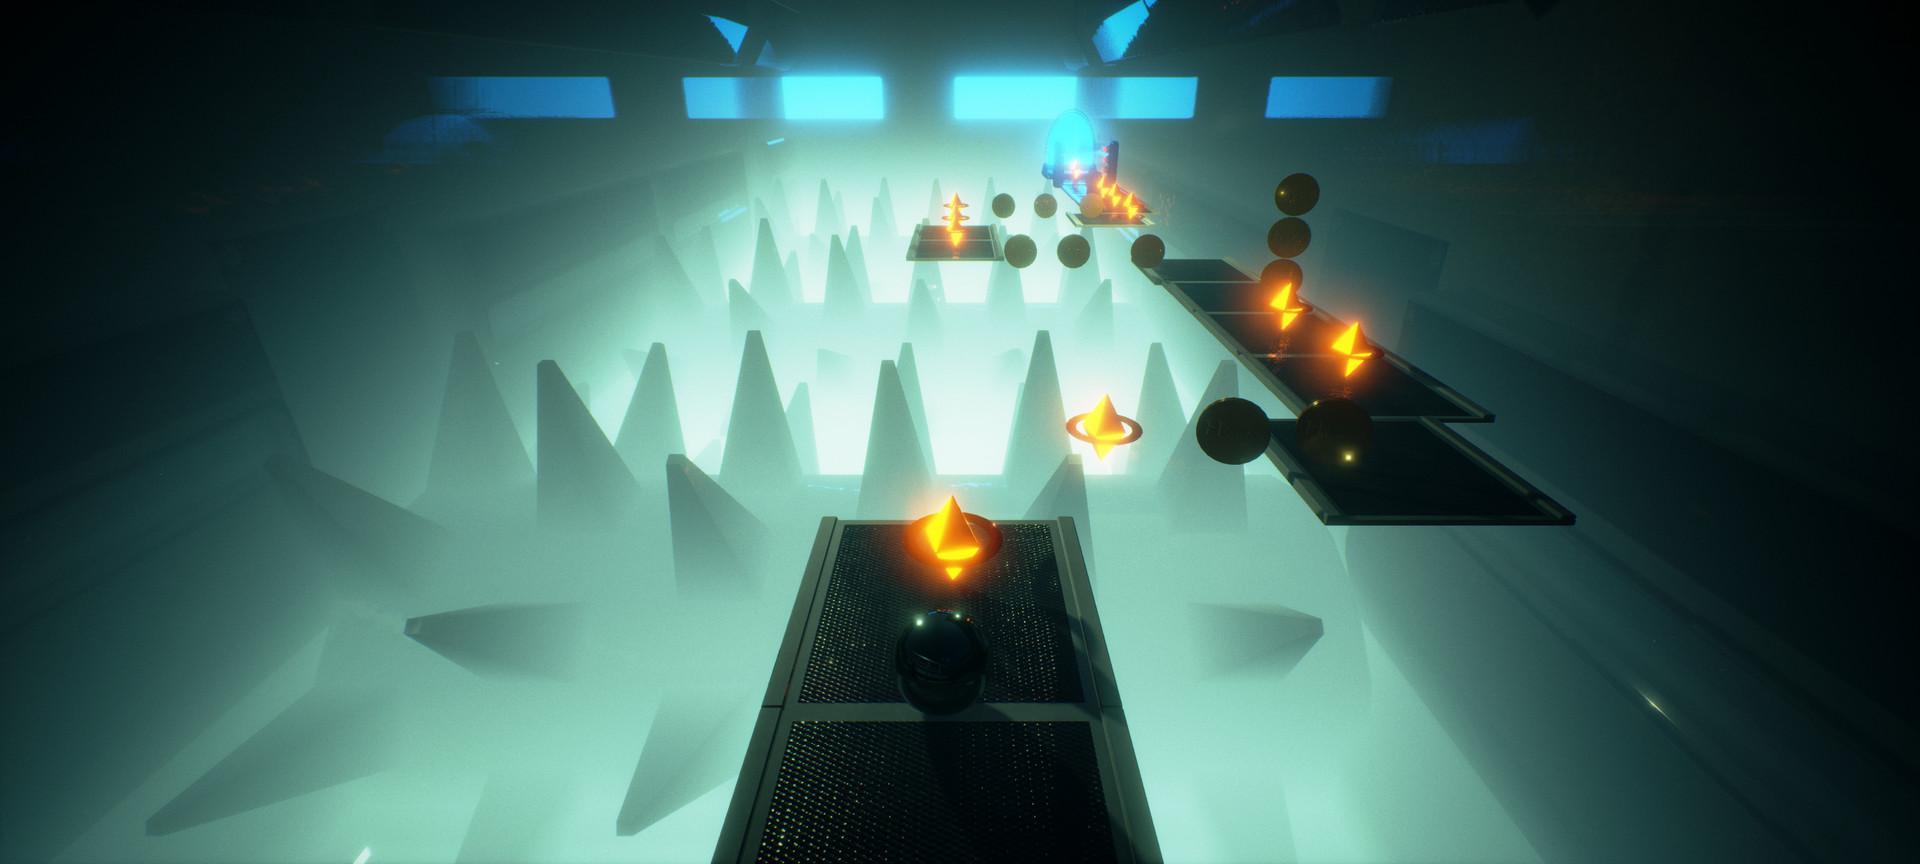 Screenshot №3 from game Hyposphere